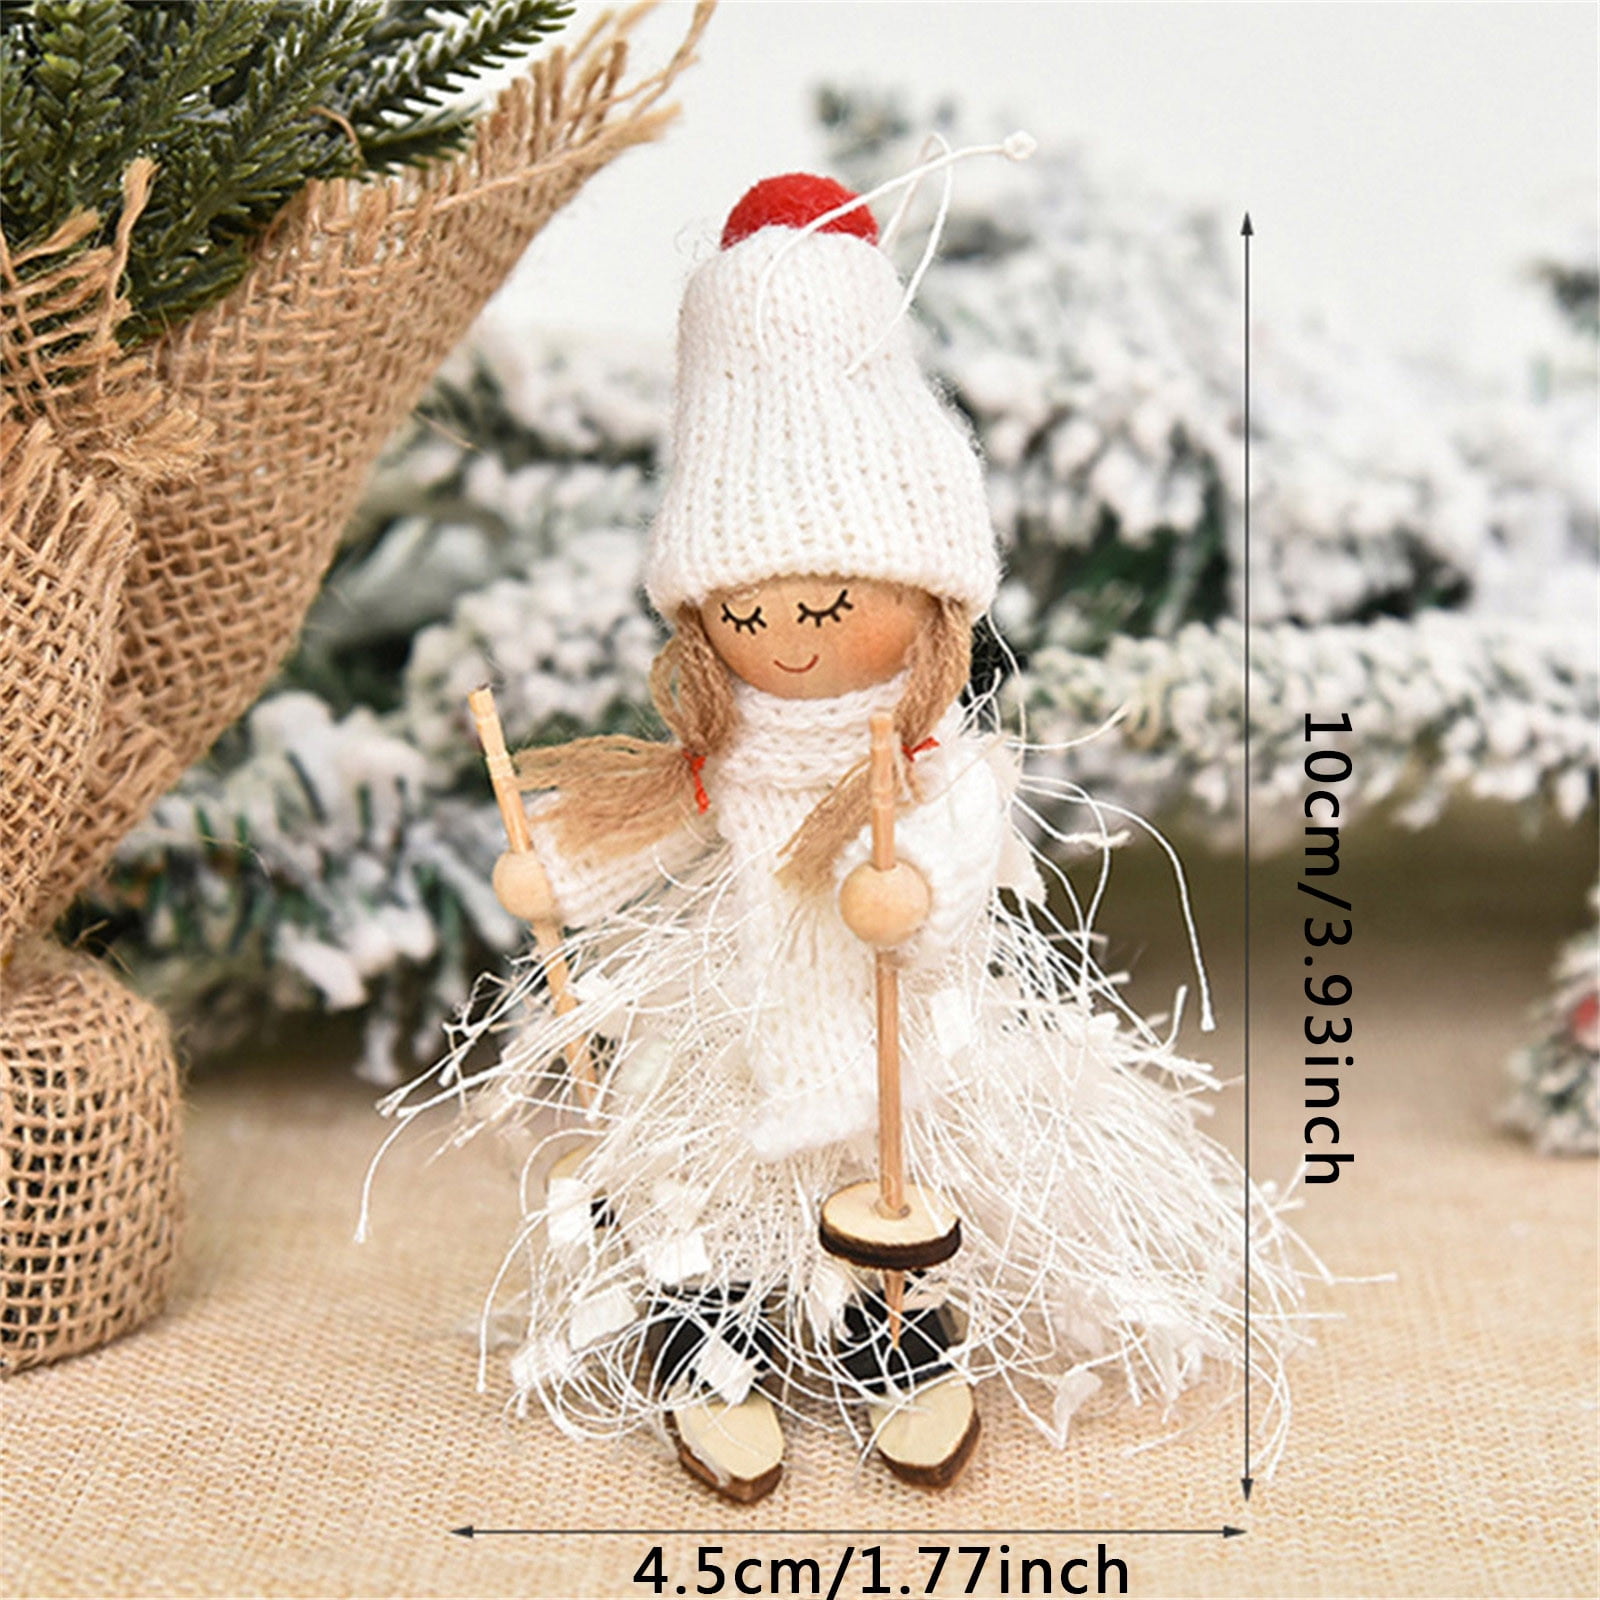  IAMAGOODLADY Christmas Decorations,Christmas Decoration Doll  Christmas Ornament,Doll Pendant Tree Hanging Ornaments Clearance Christmas Cheap  Stuff Under 1 Dollar : Home & Kitchen